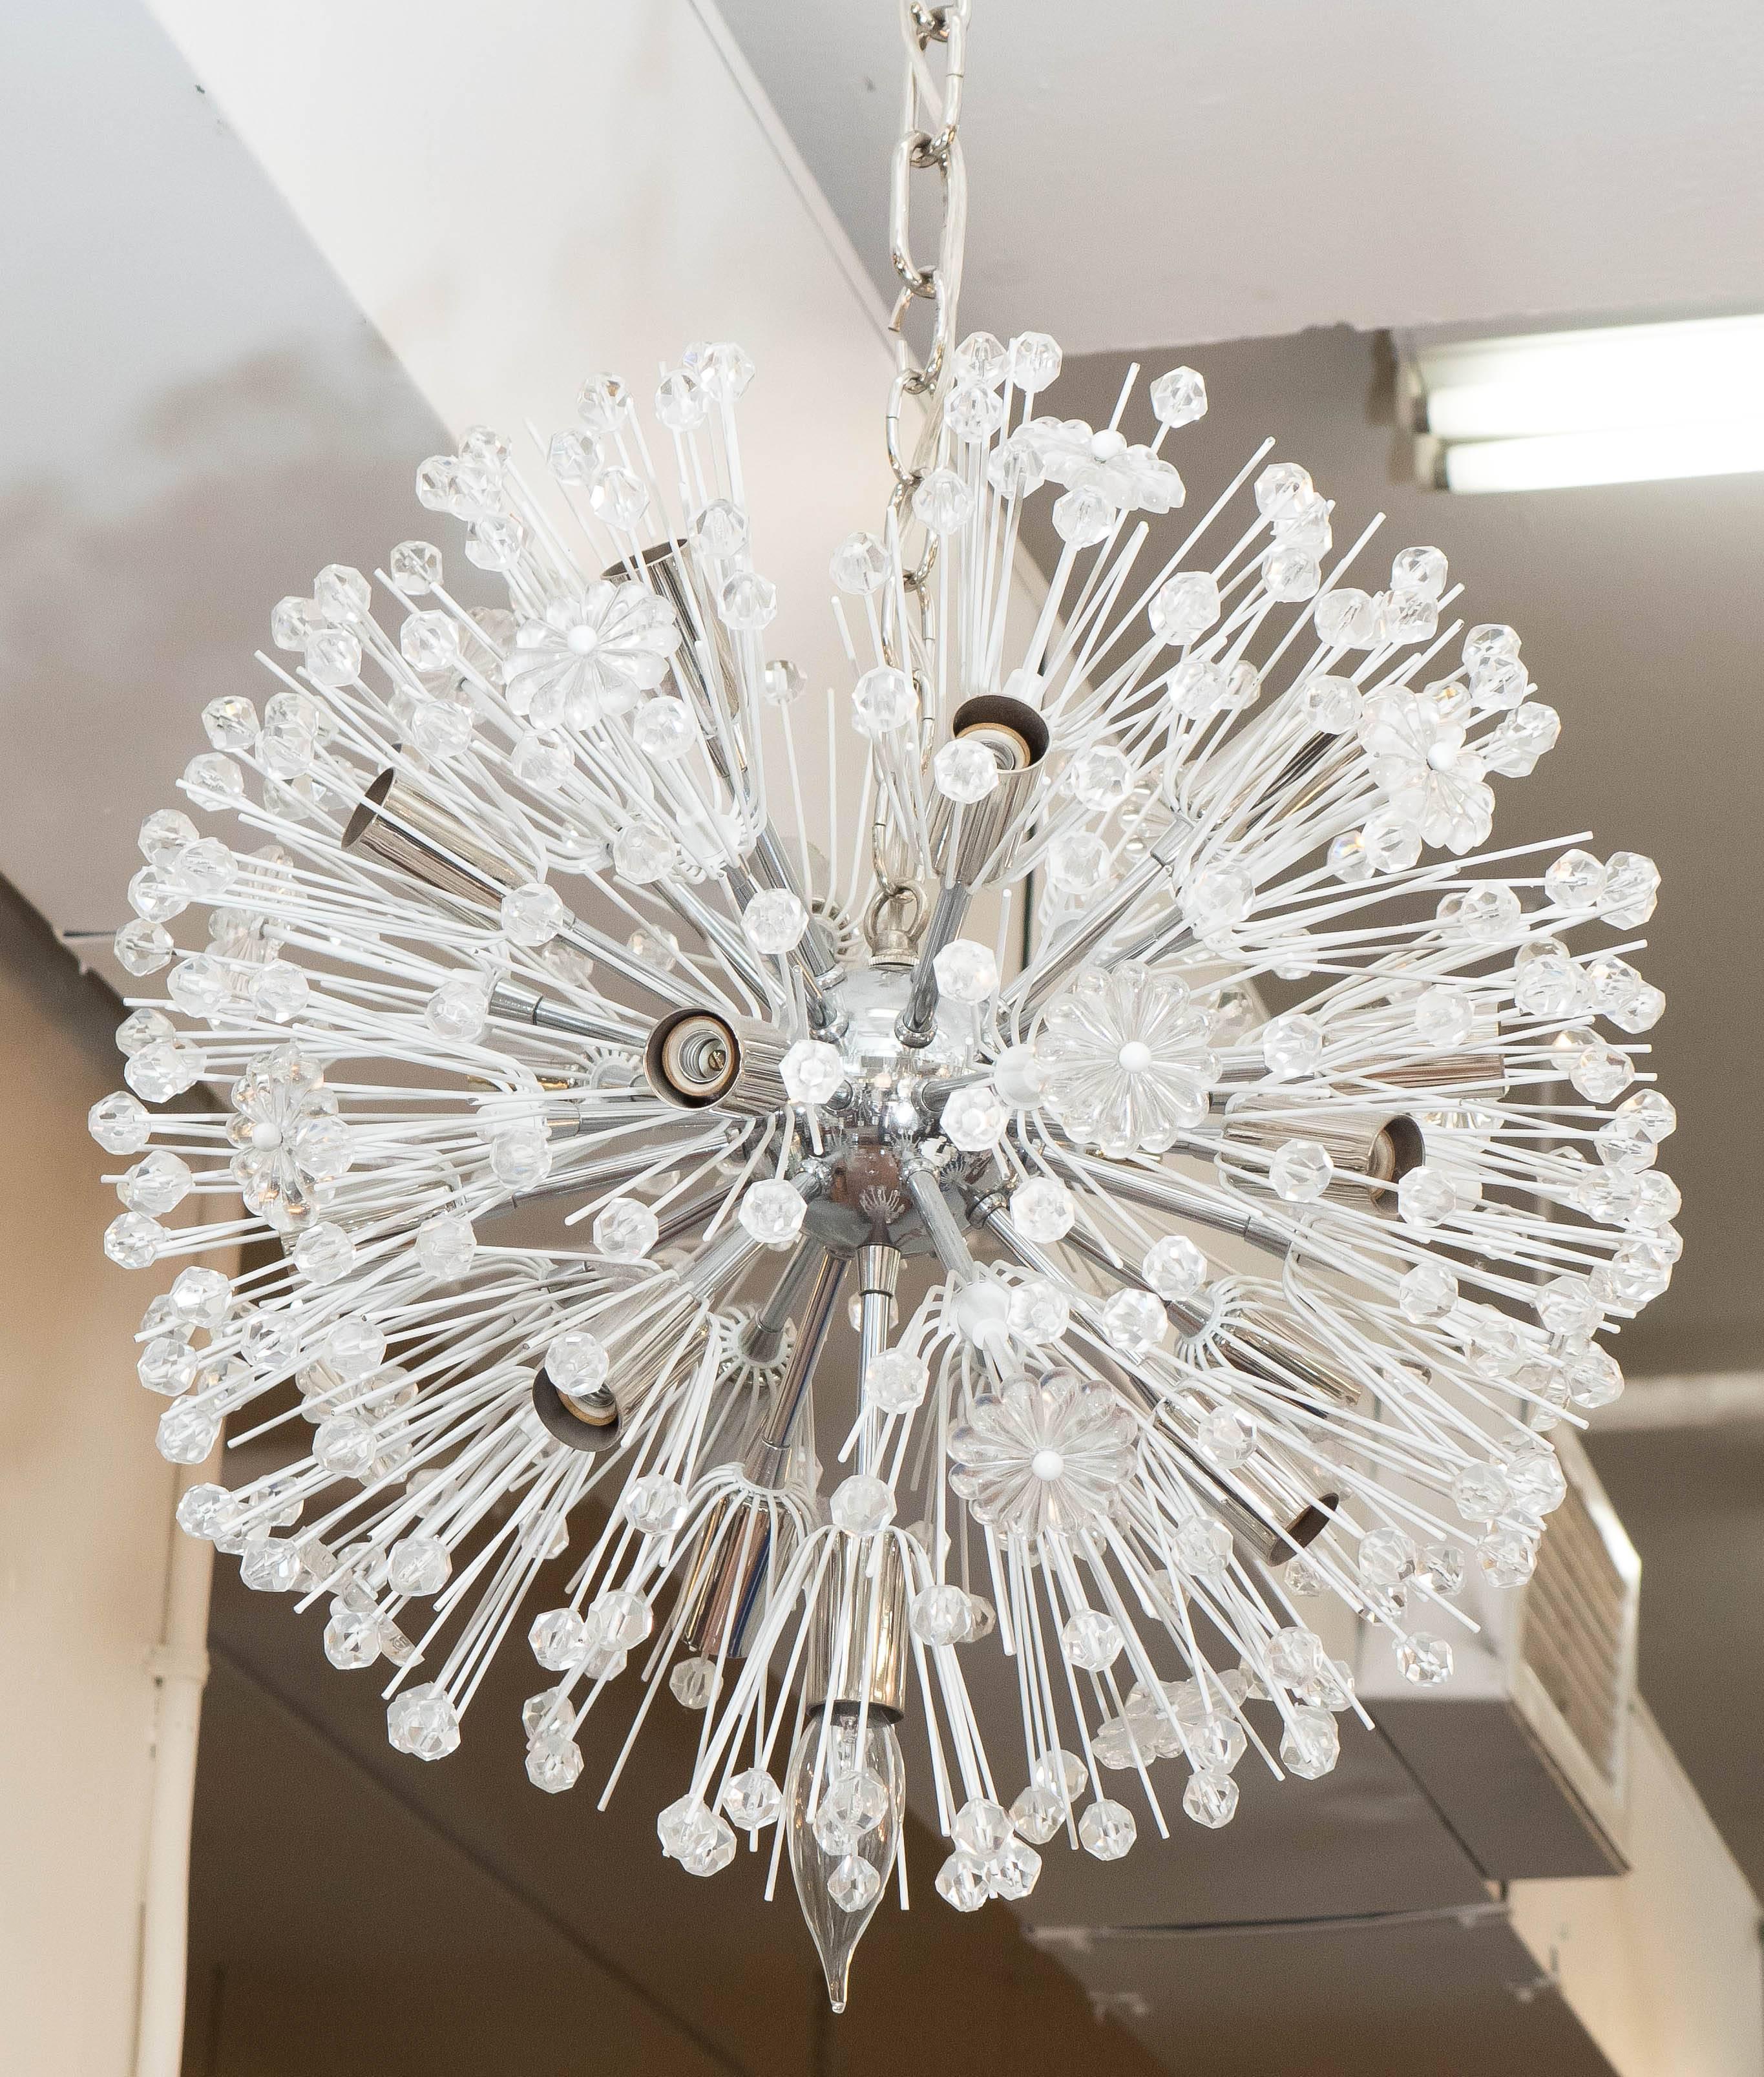 A 'snowball' Sputnik chandelier by Austrian designer Emil Stejnar and produced by Rupert Nikoll circa 1960s, nucleus, arms and socket covers in chrome, surrounded by faceted glass beads and rosettes on white enameled spires. Very good vintage